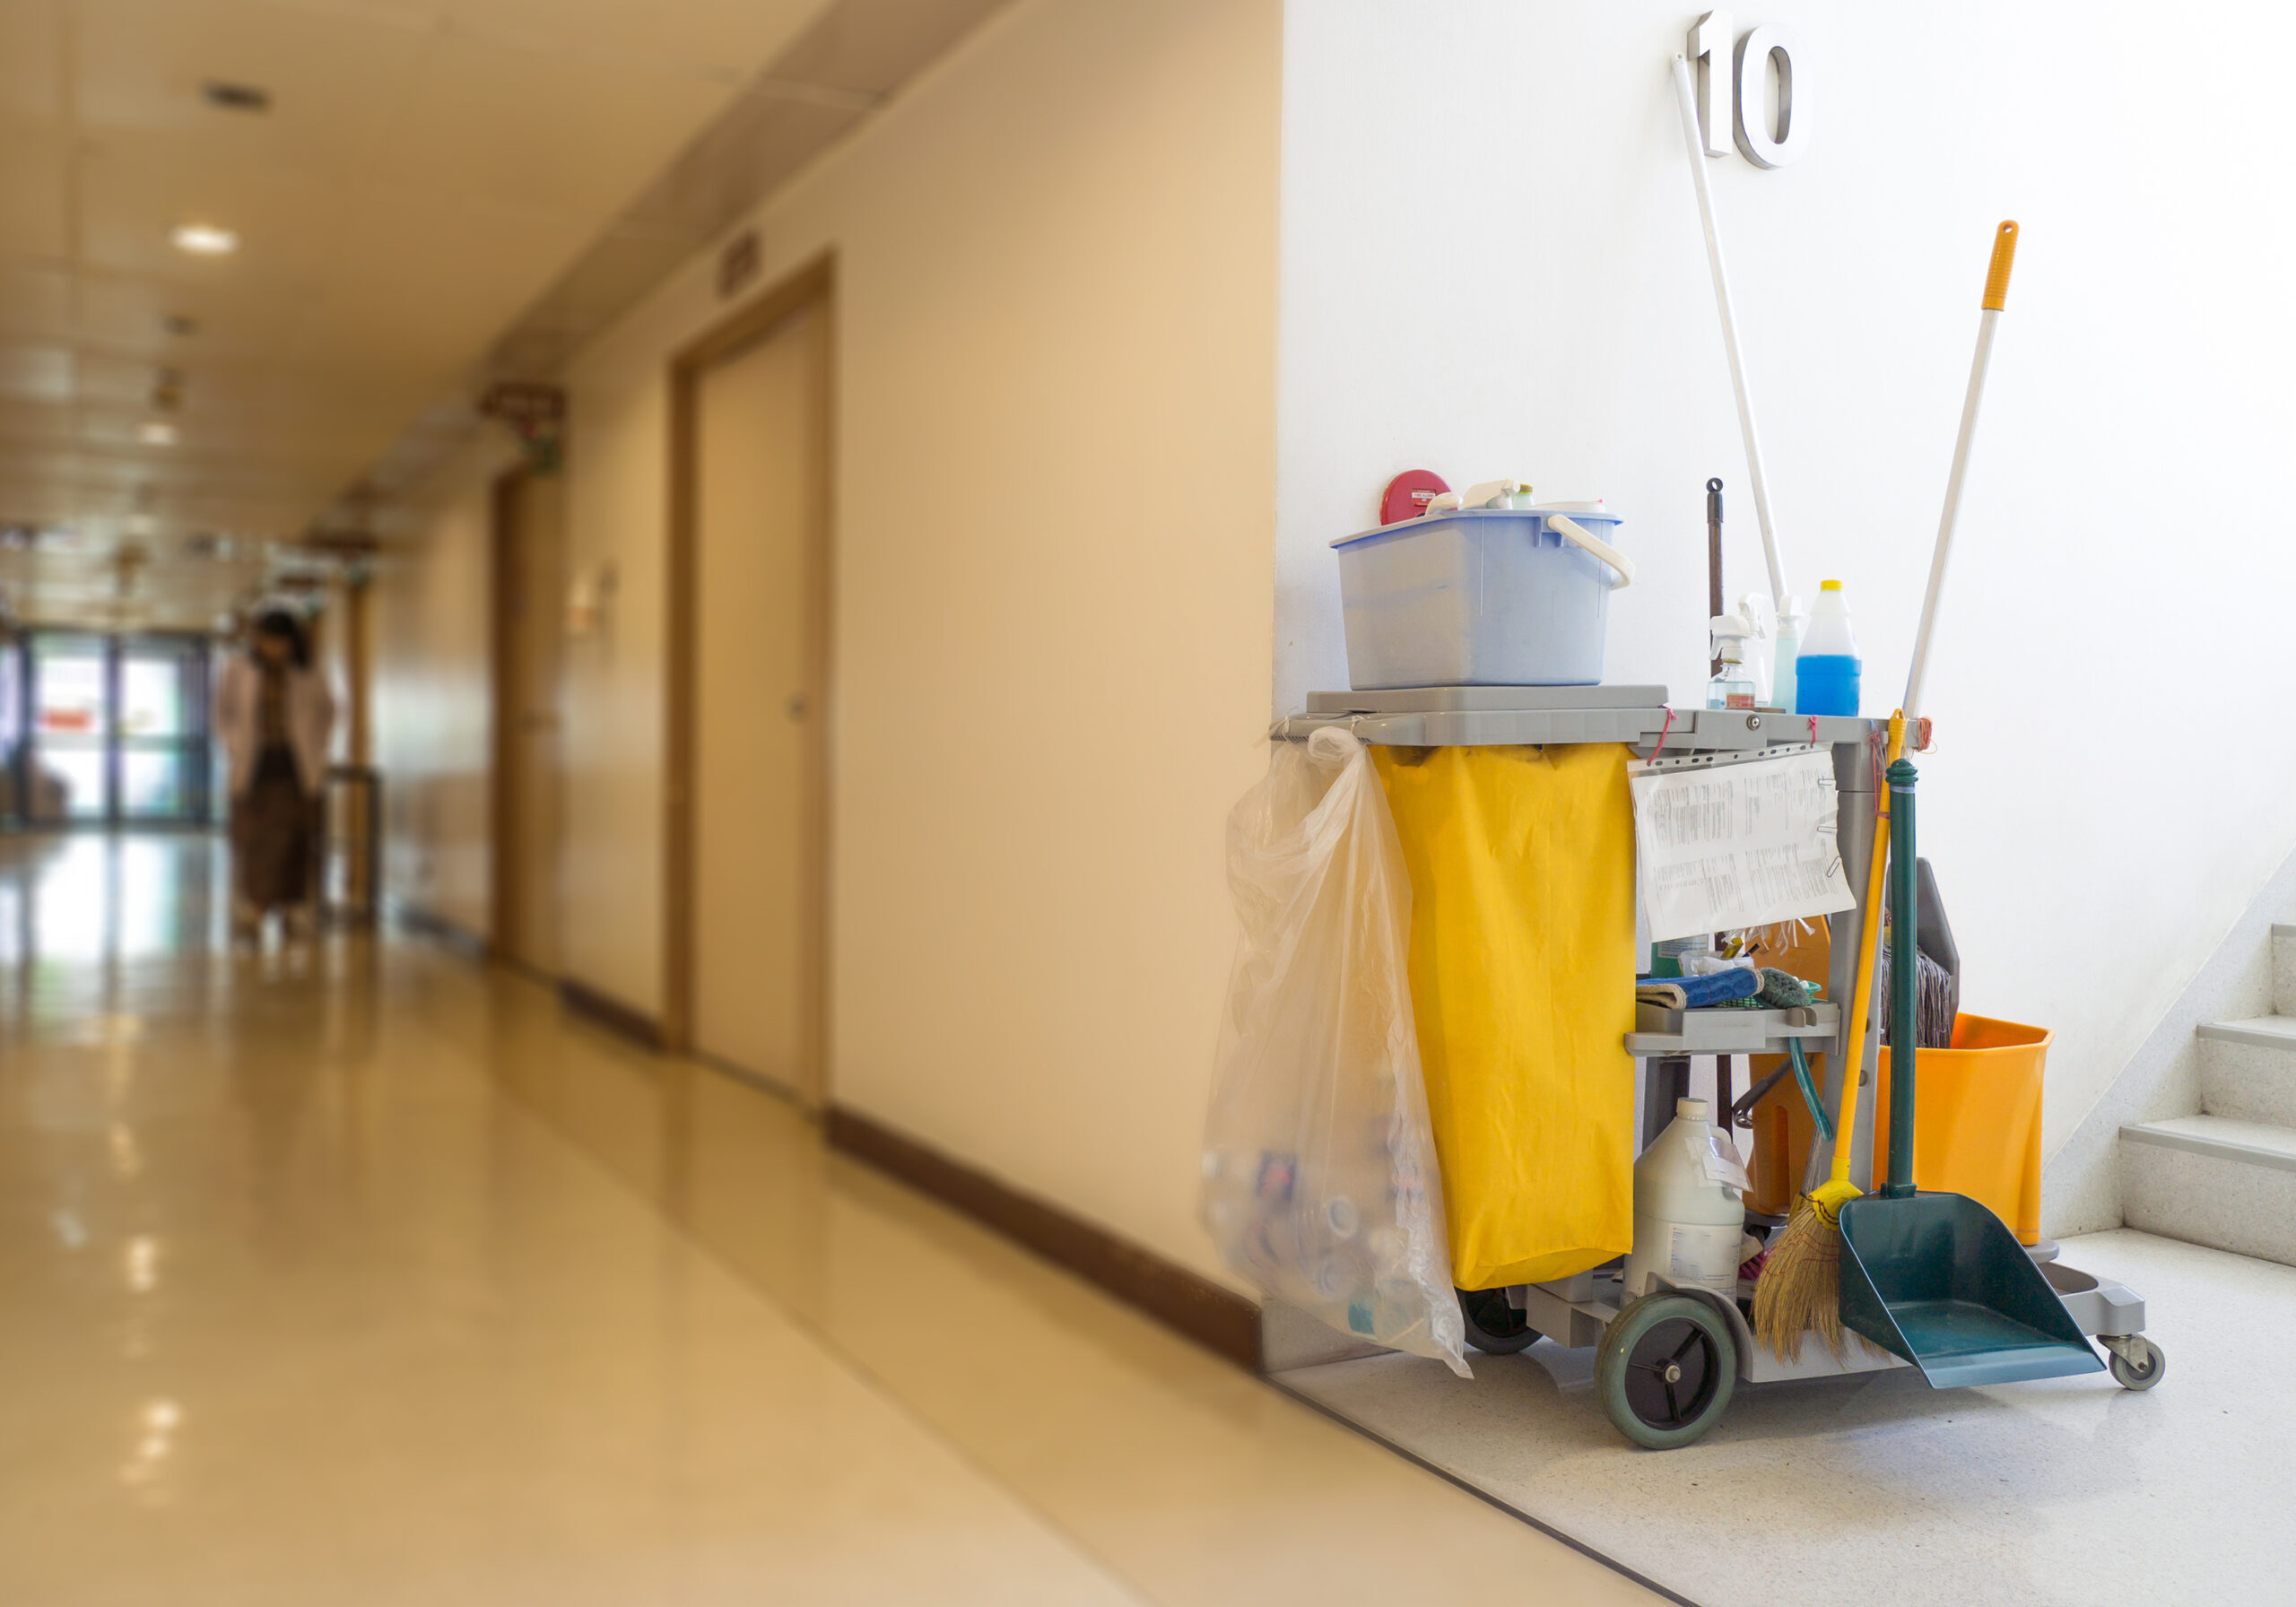 Cleaning tools cart wait for maid or cleaner in the hospital. Bucket and set of cleaning equipment in the hospital. Concept of service, worker and equipment for cleaner and health